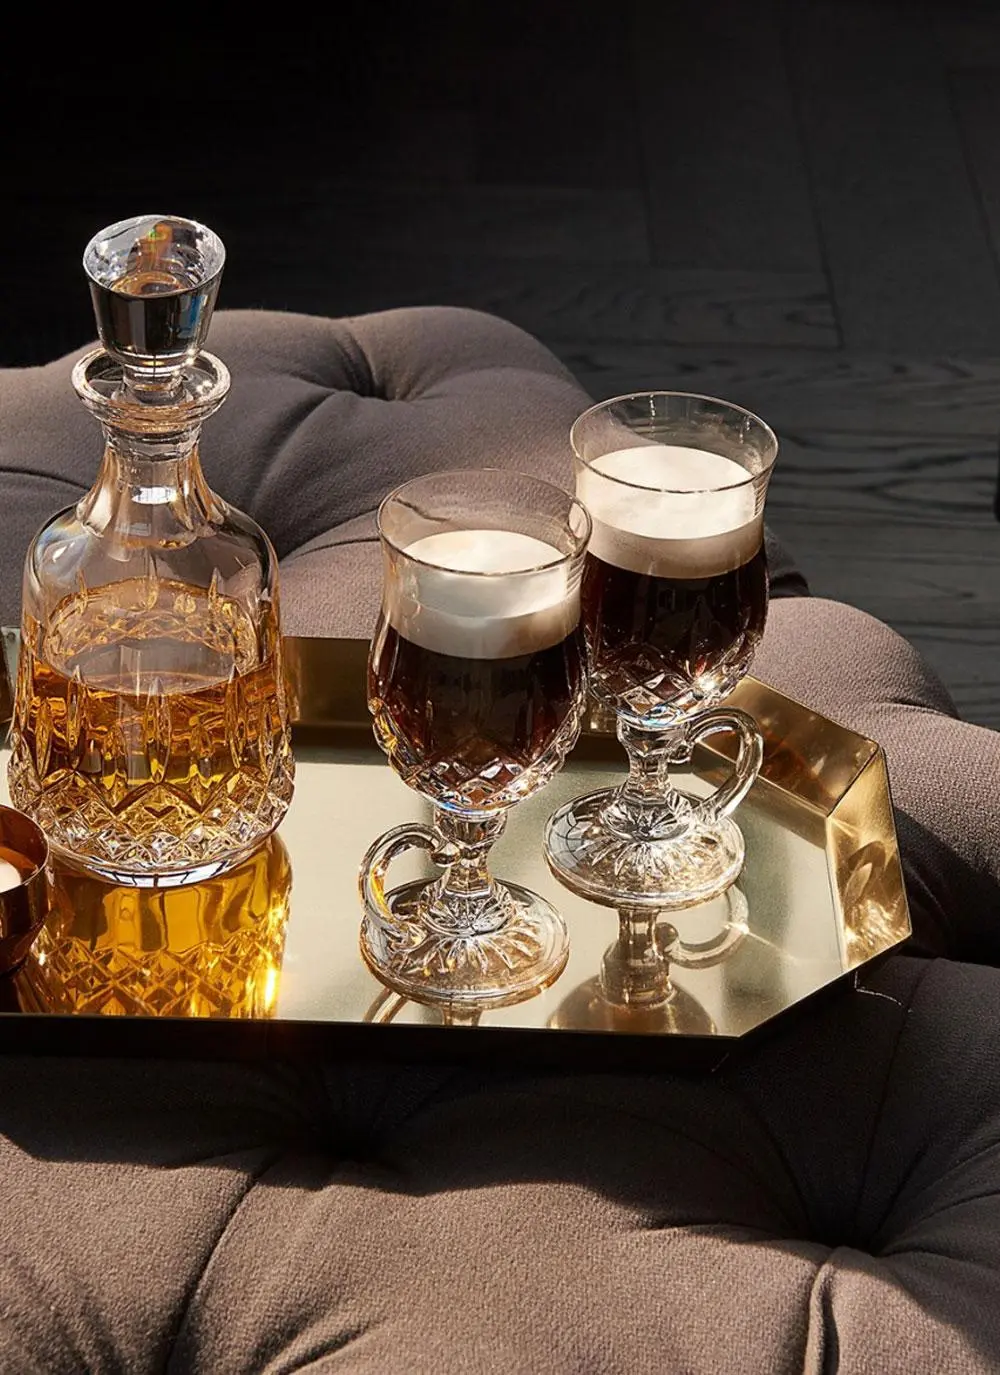 https://www.blarney.com/contentFiles/productImages/Large/waterford-crystal-lismore-irish-coffee-pair.webp